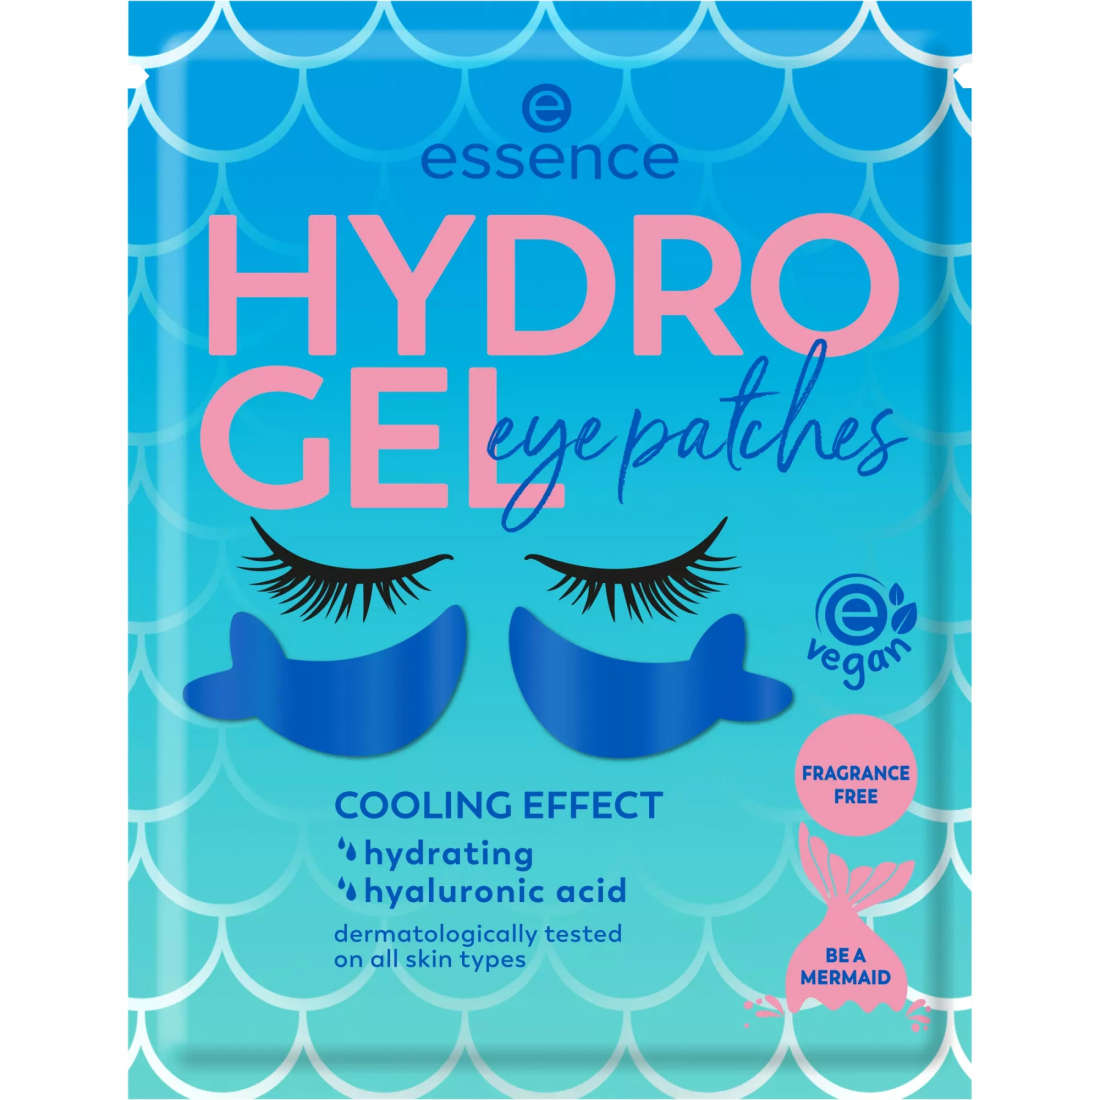 Patchs pour les Yeux 'Hydro Gel Eye Patches' - 03-Eye Am A Mermaid